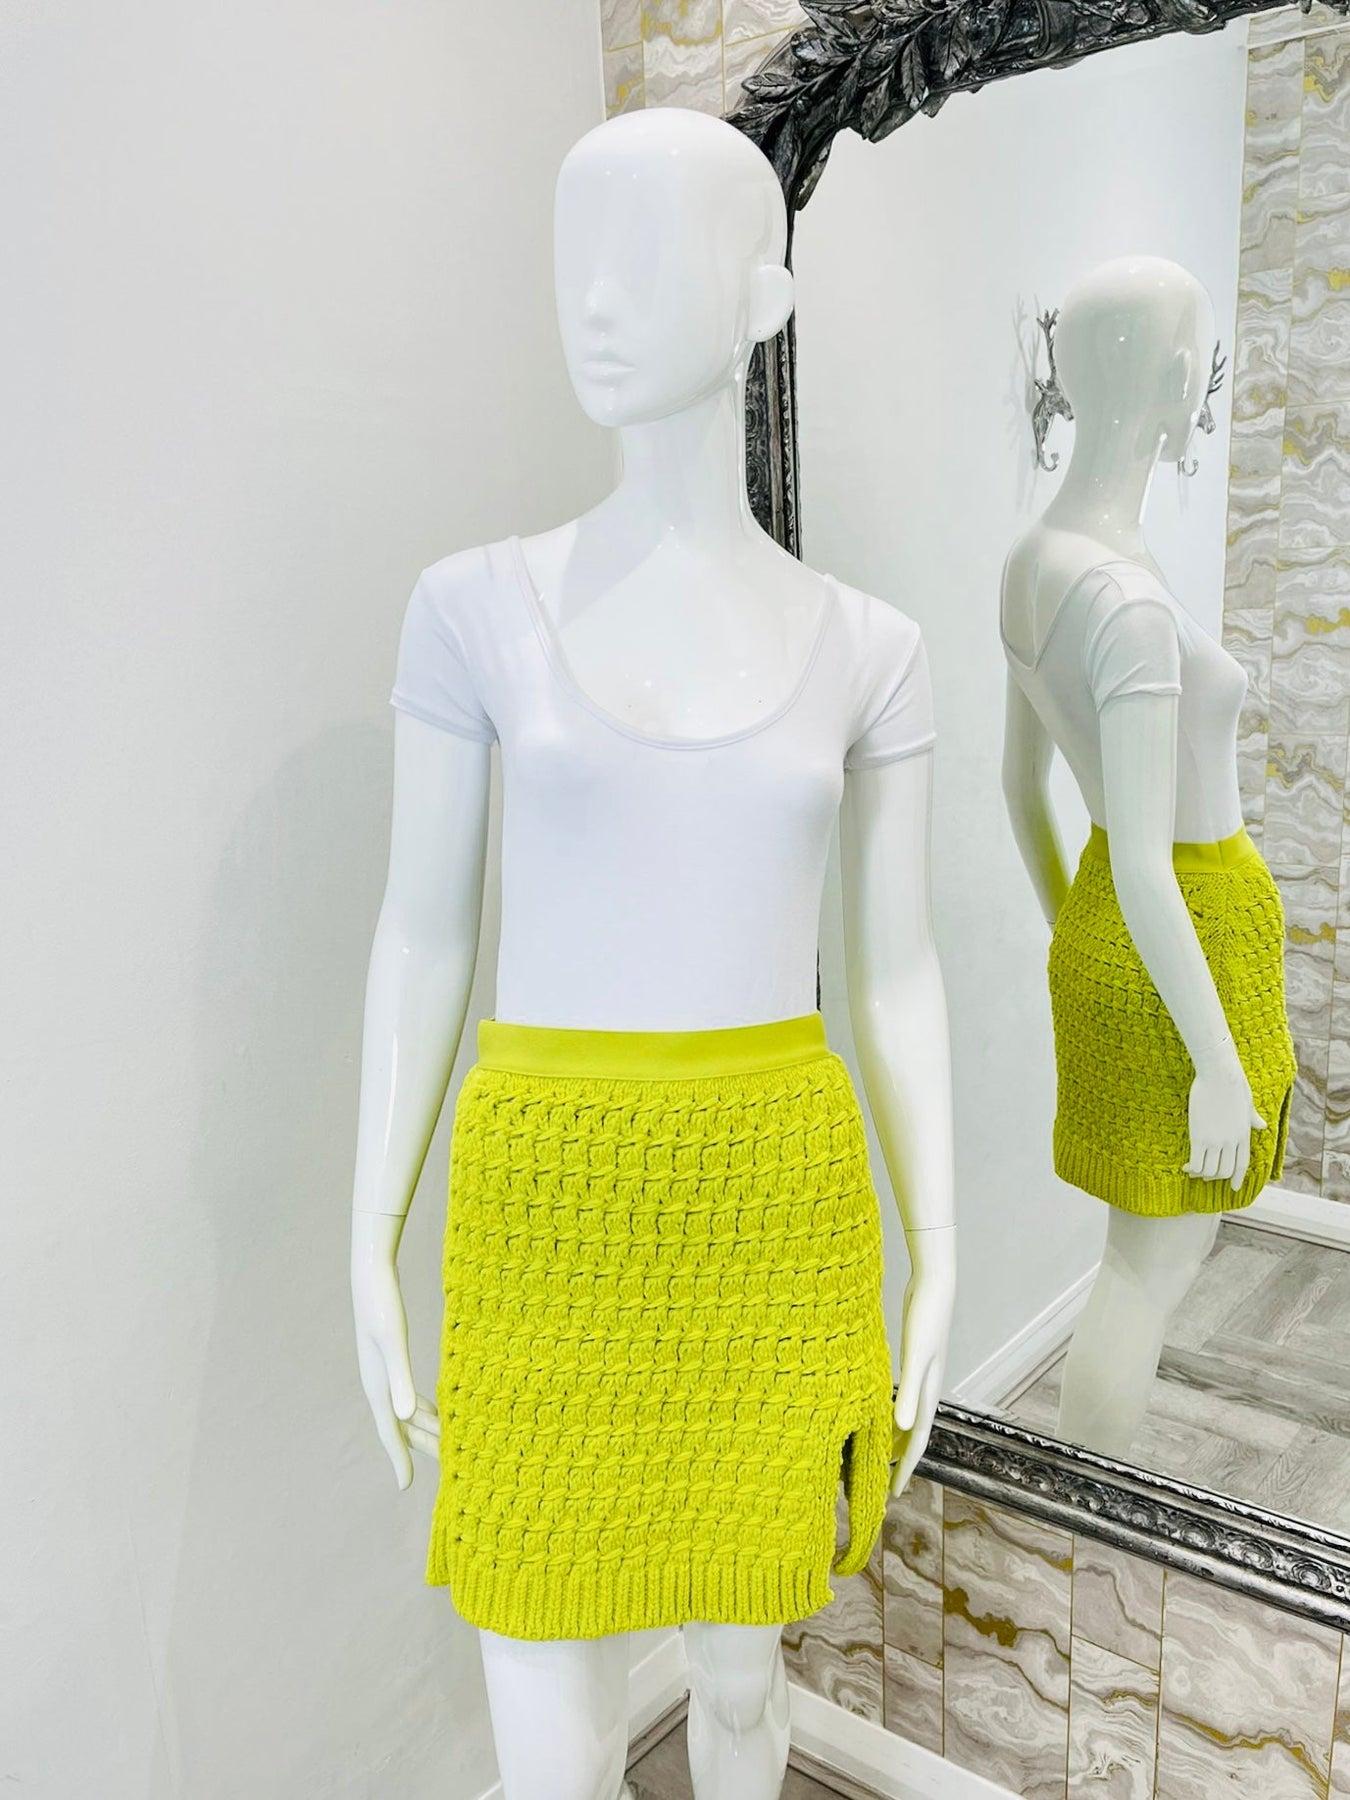 Bottega Veneta Cable Knit Chenille Mini Skirt

Bright fluorescent green skirt in a weighty chenille material echoing the famous signature woven style. Chunky ribbed hem and stretchy, fitted waistband.

Additional information:
Size – S
Composition-